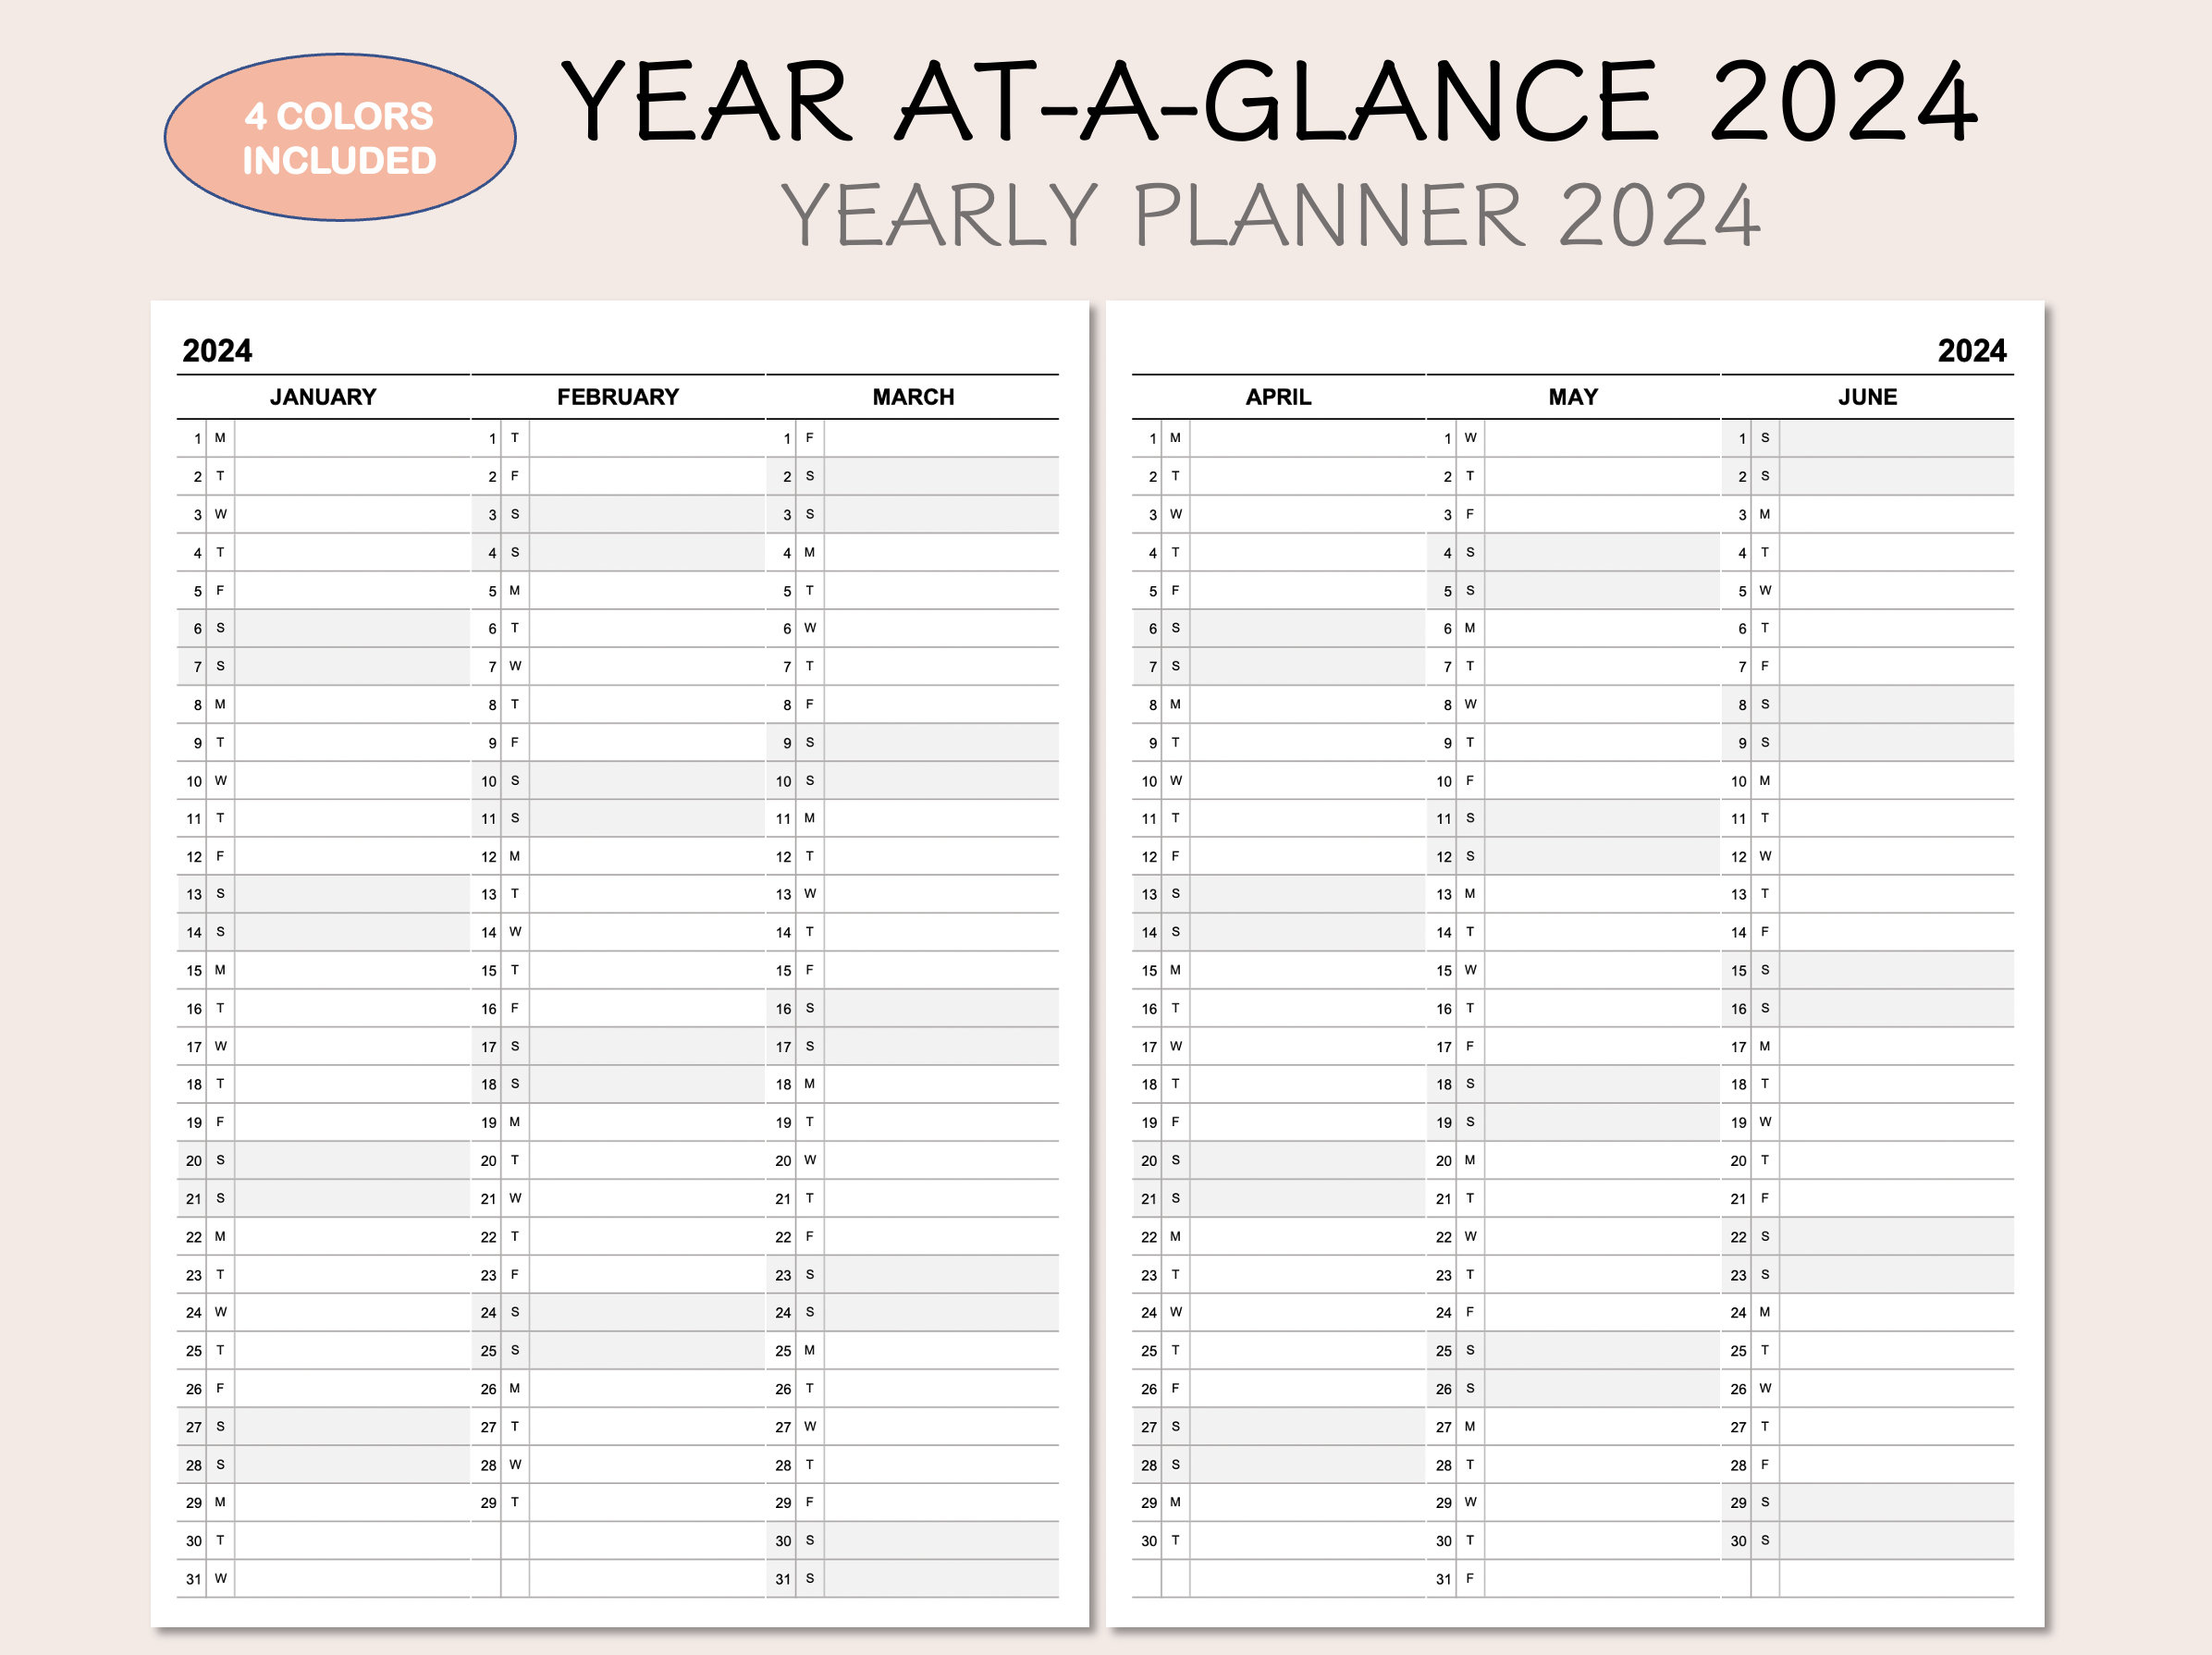 Printable Yearly Planner Calendar 2024 Yearly Overview 2024 - Etsy | Printable Calendar Planner 2024